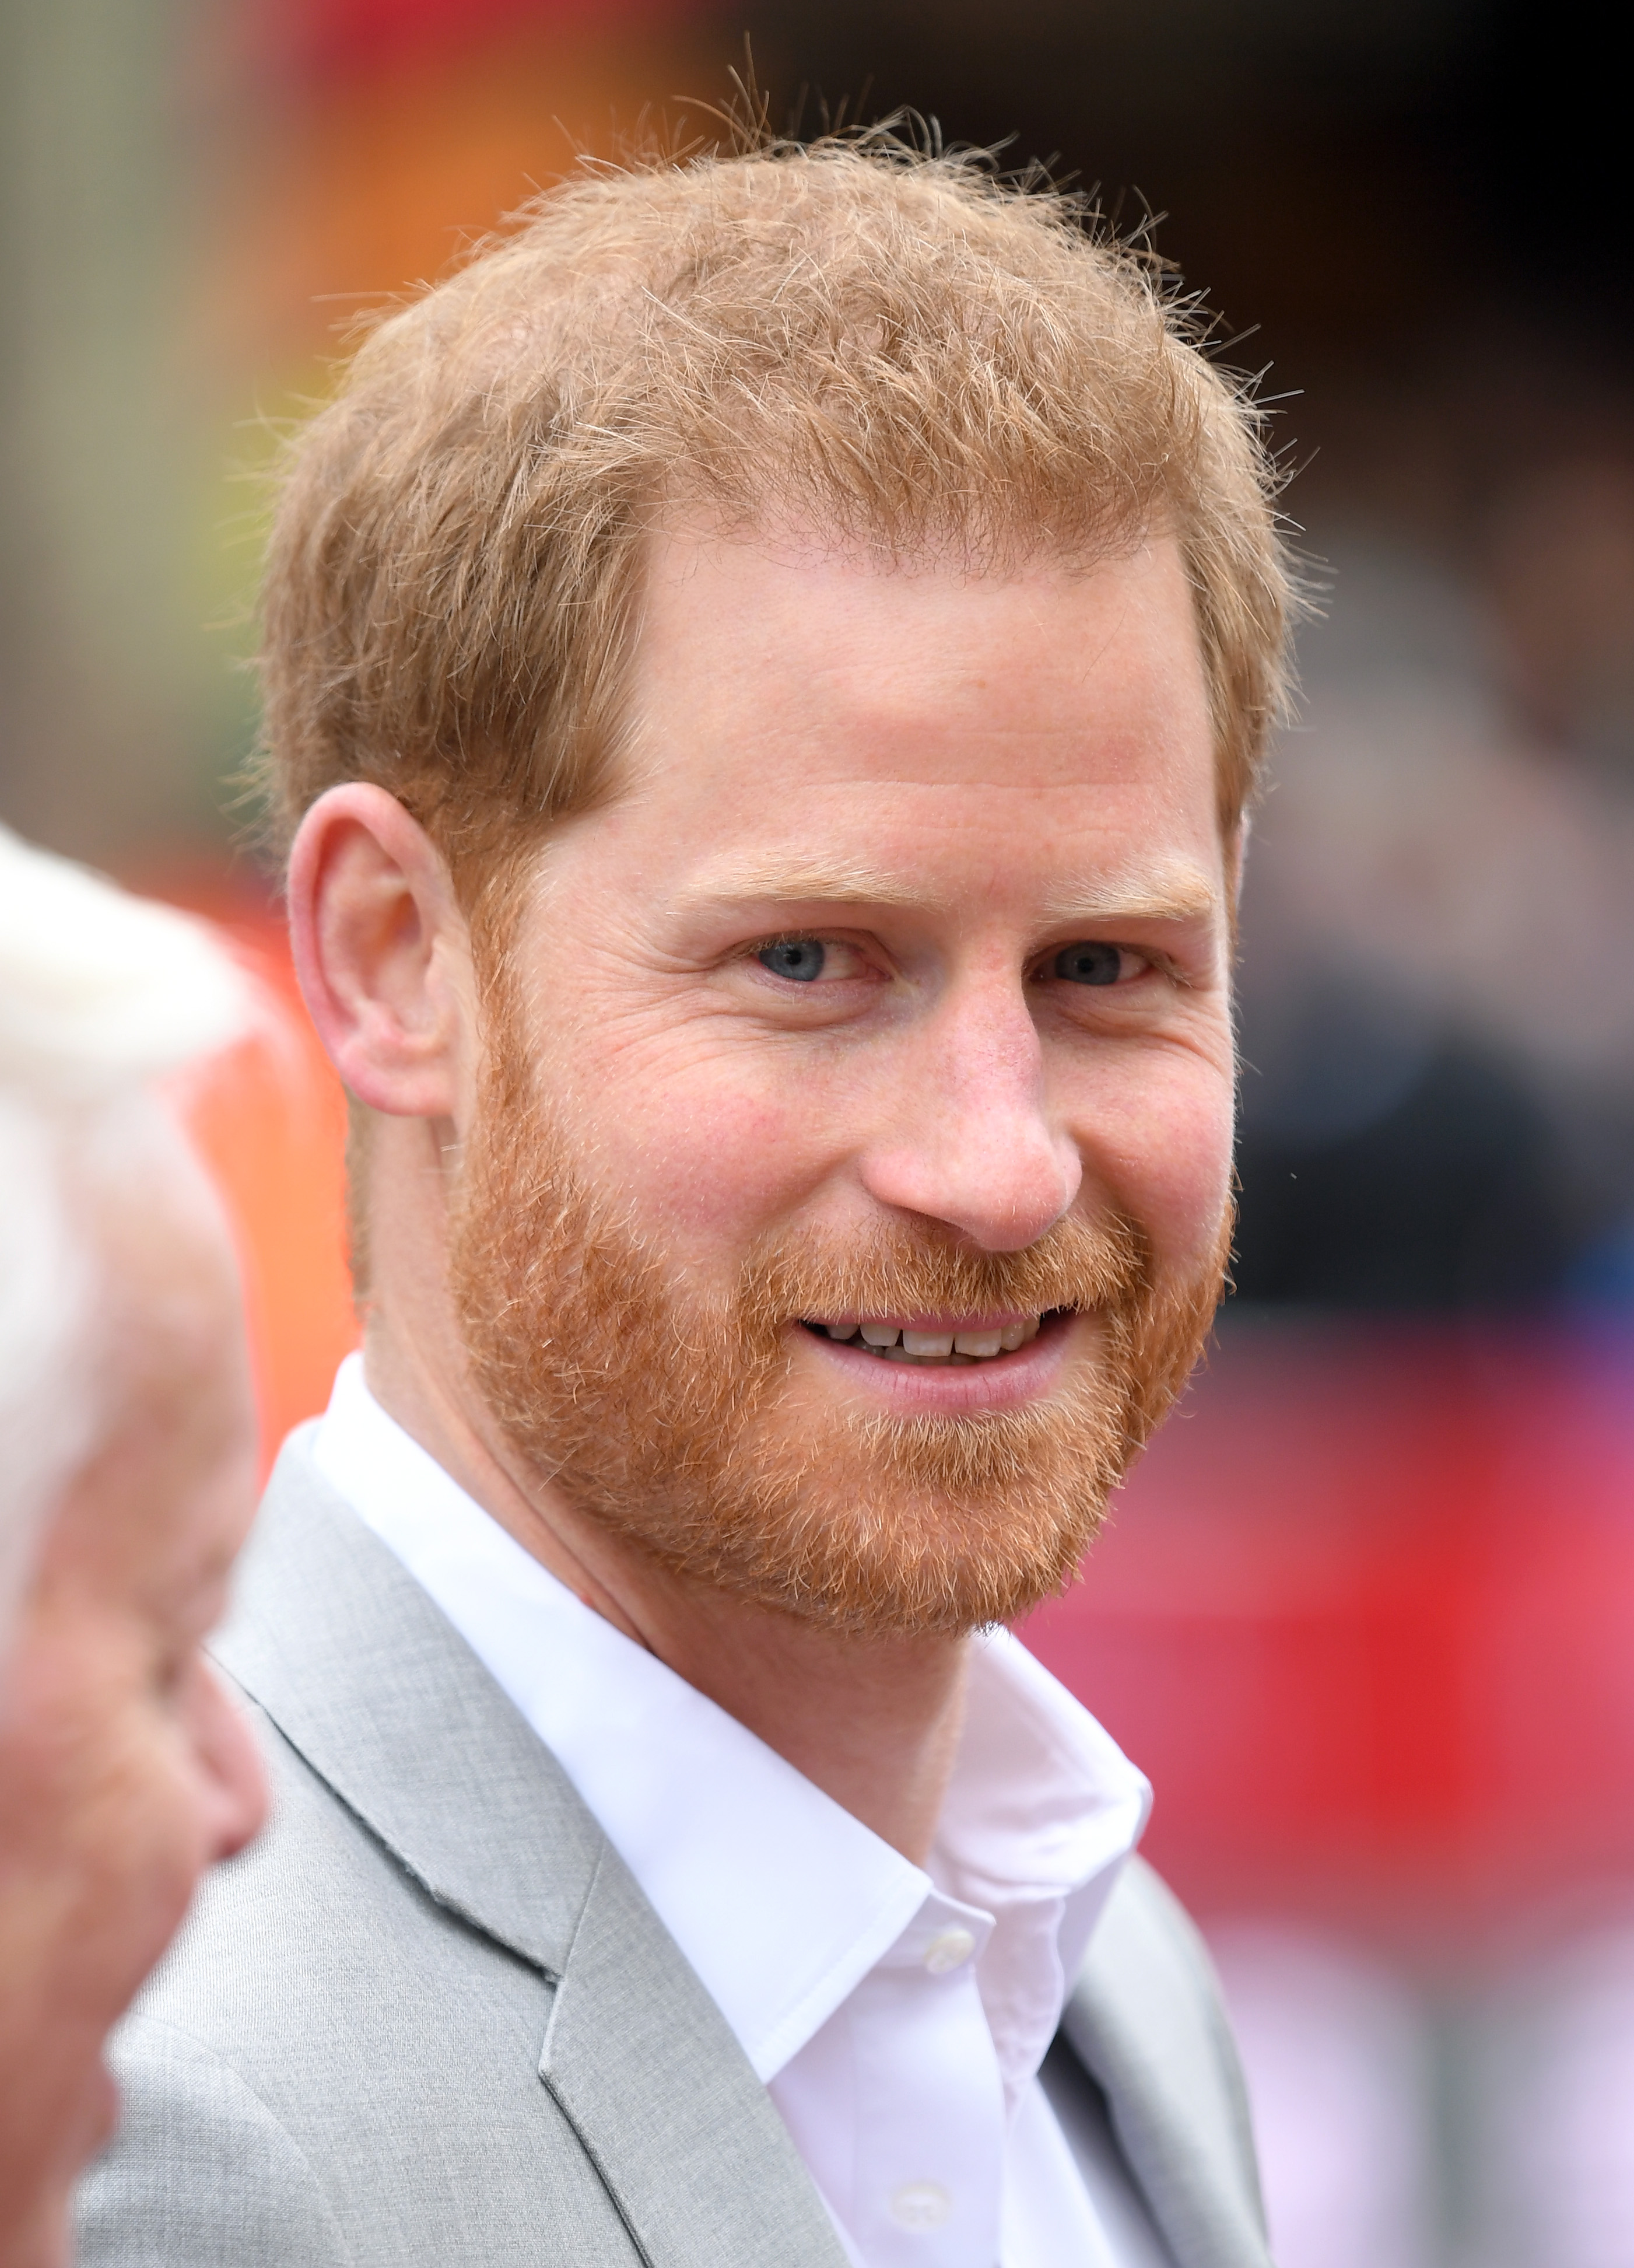 Prince Harry, Duke of Sussex attends the Virgin London Marathon in London, United Kingdom, on April 28, 2019. | Source: Getty Images